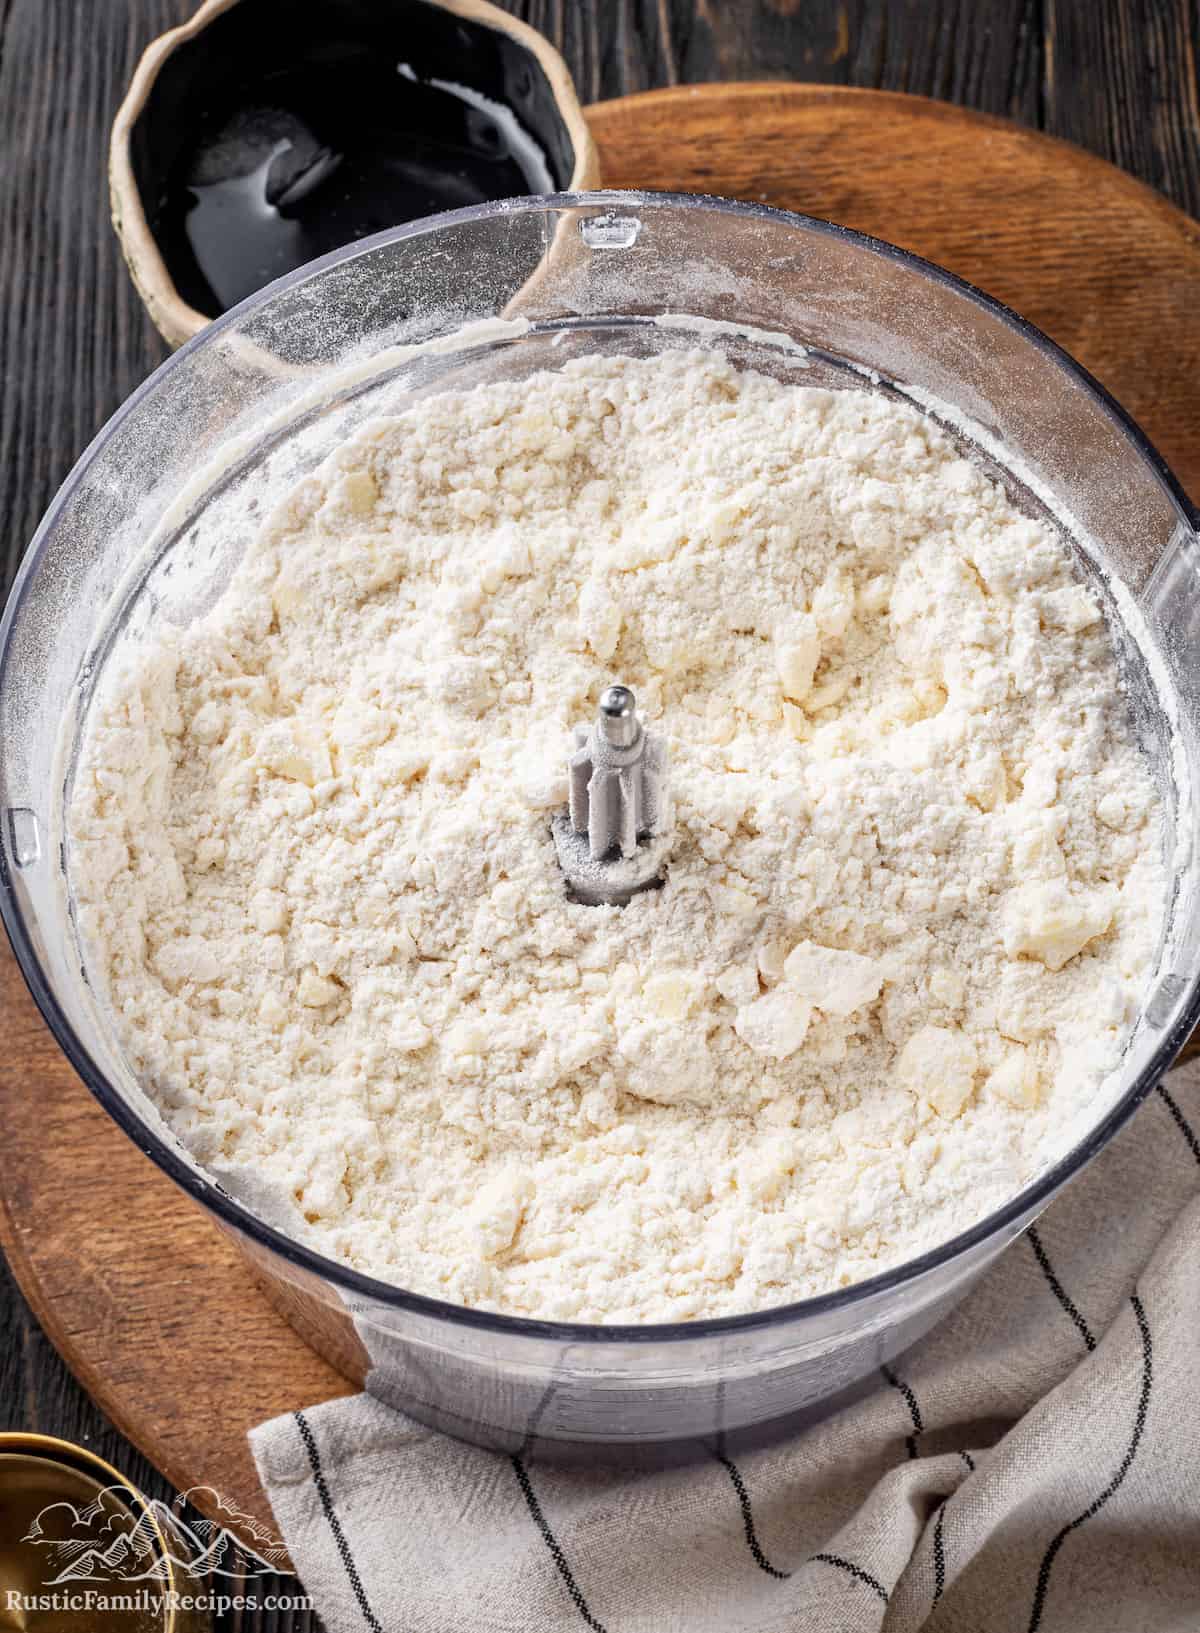 Food processor with pie dough being made